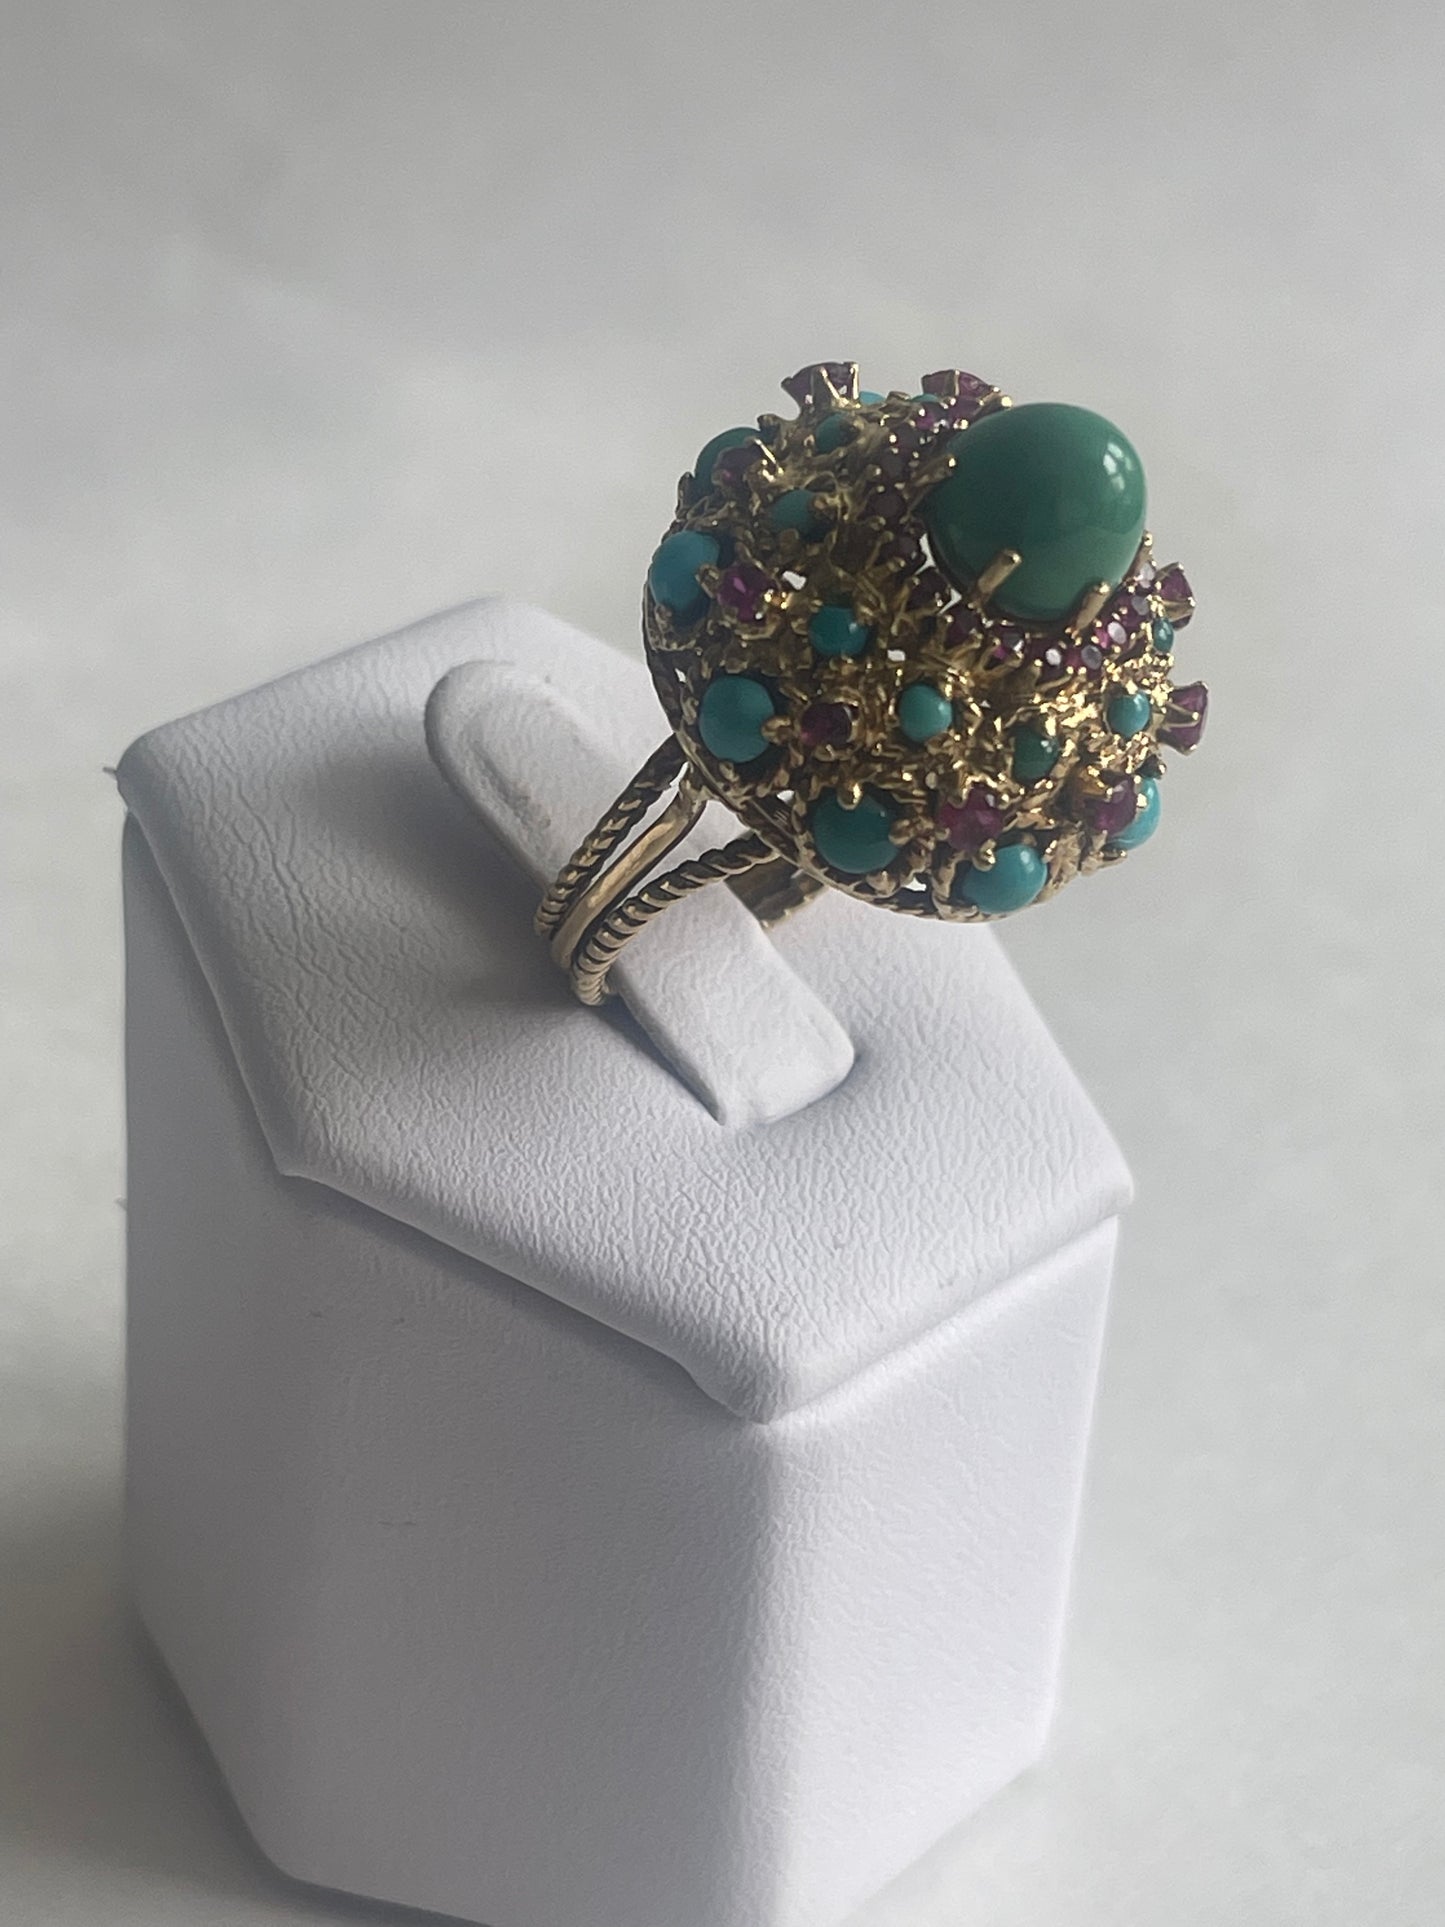 A vintage turquoise dome ring with rubies in a 14kt setting